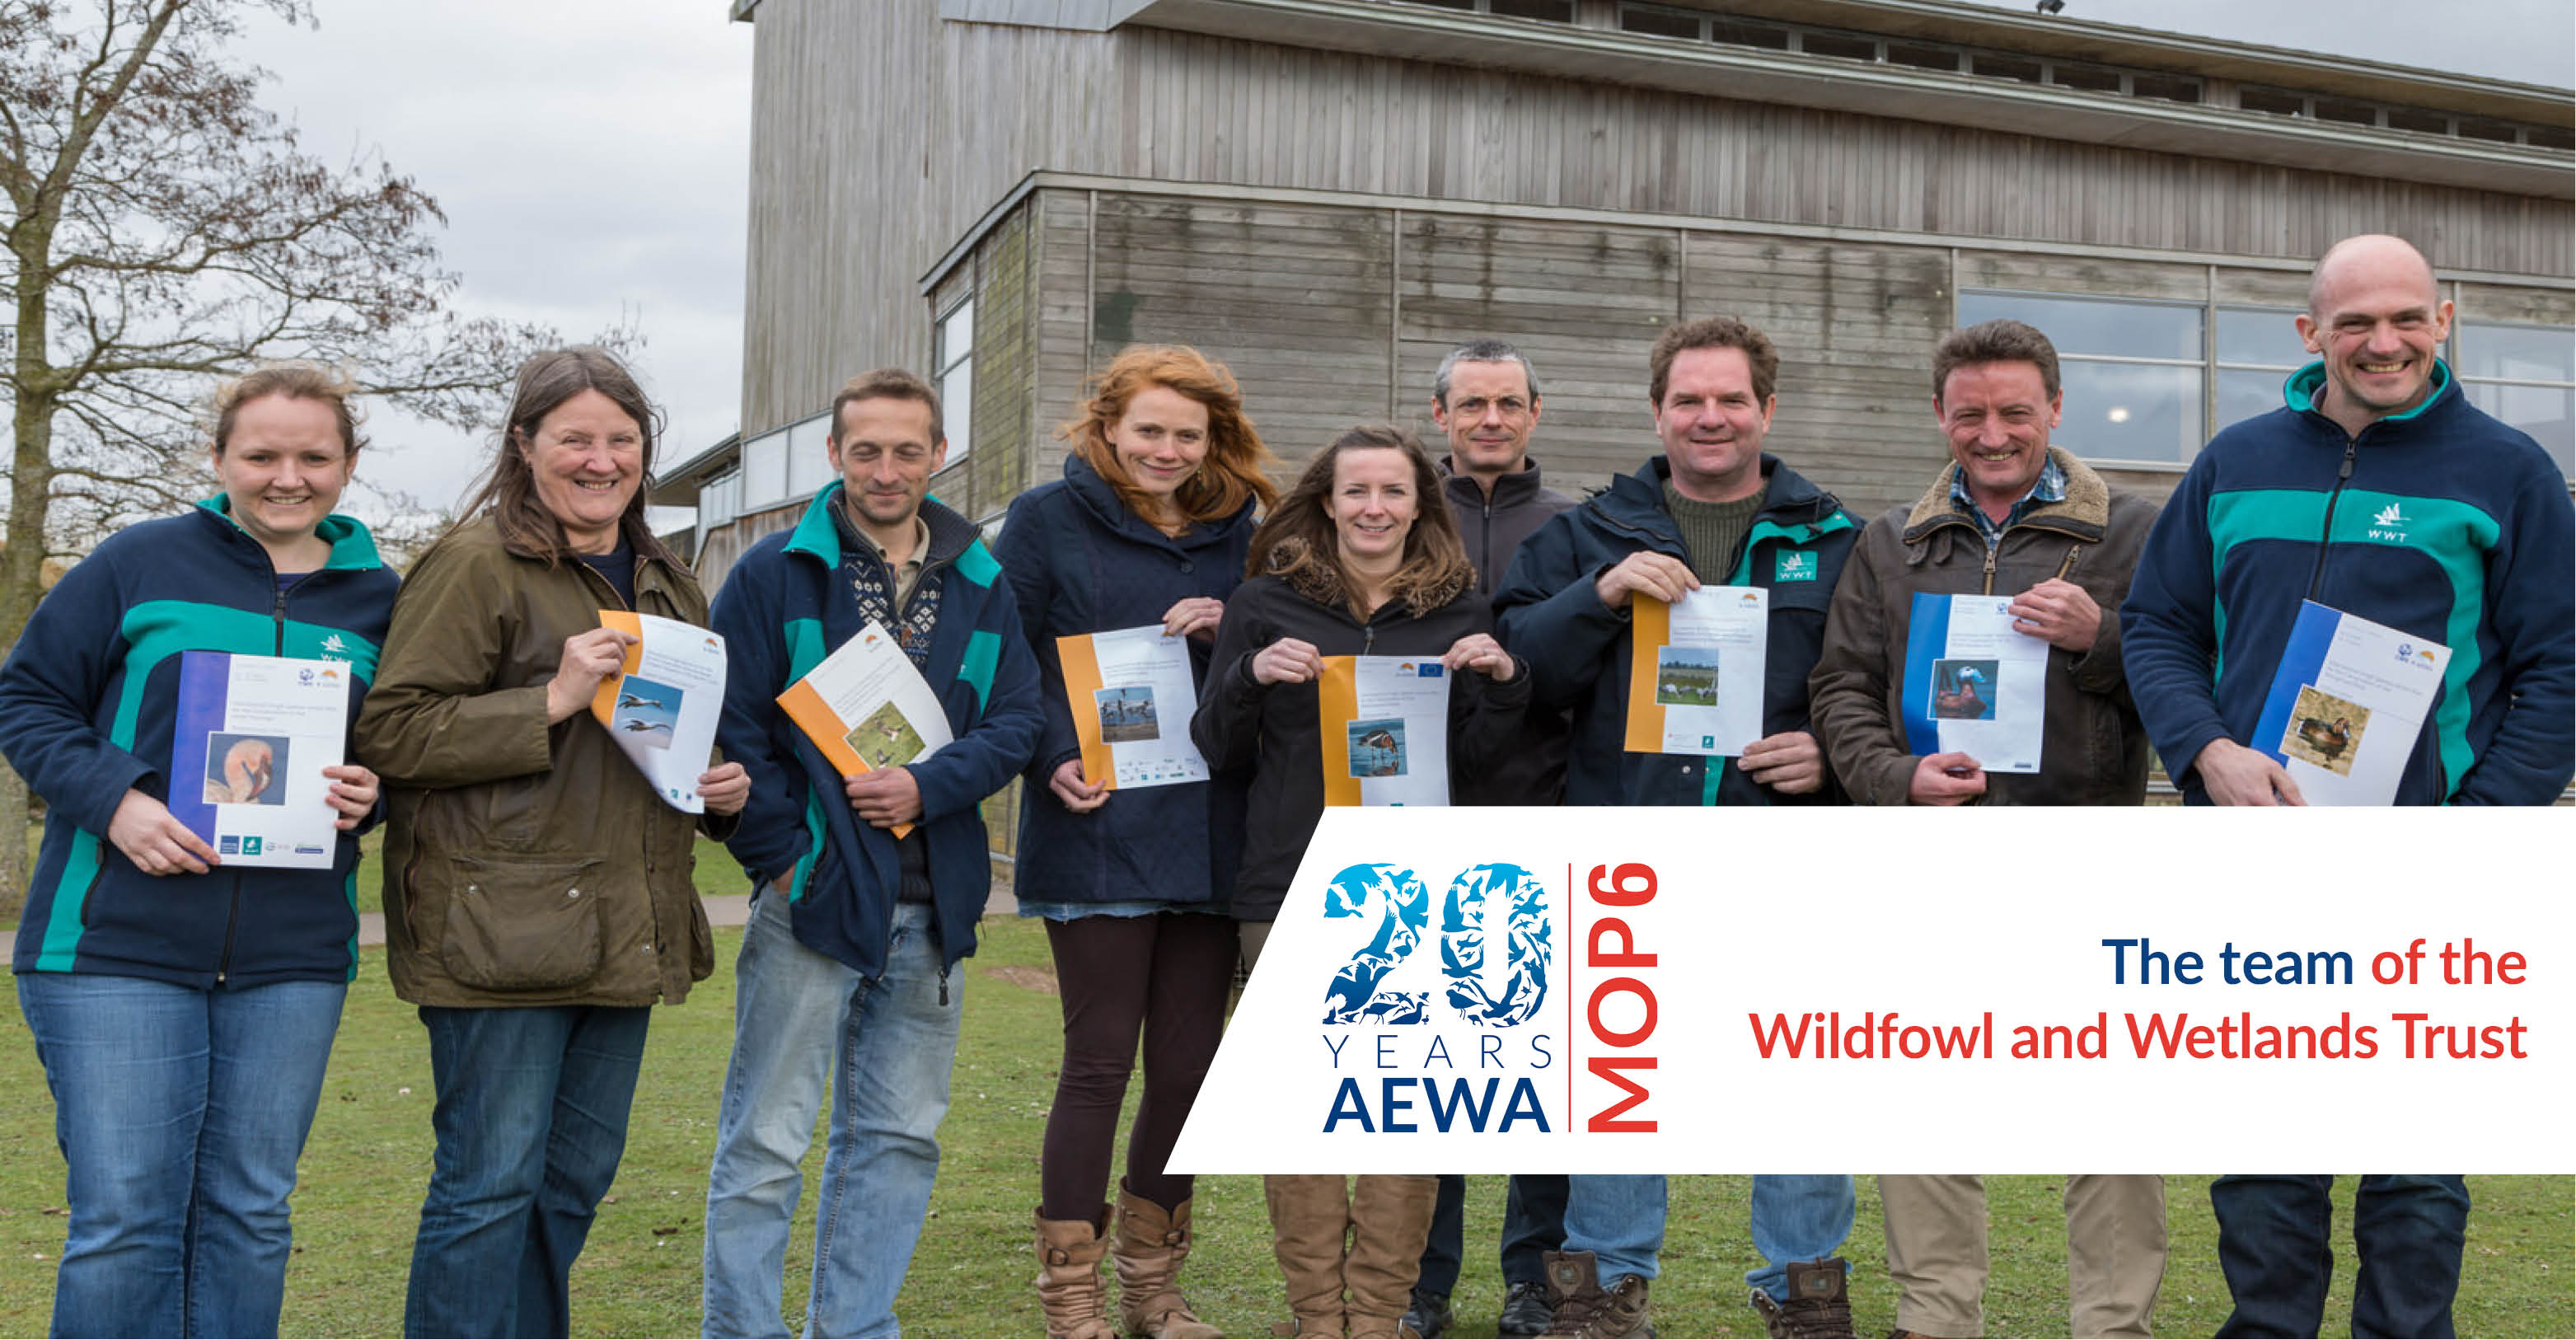 The team of the Wildfowl and Wetlands Trust (WWT) - from left to right Ms. Rebecca Lee, Ms. Eileen Rees, Mr. Geoff Hilton, Ms. Julia Newth, Ms. Anne Harrison, Mr. Peter Cranswick, Mr. Nigel Jarrett, Mr. Baz Hughes and Mr. Richard Hearn